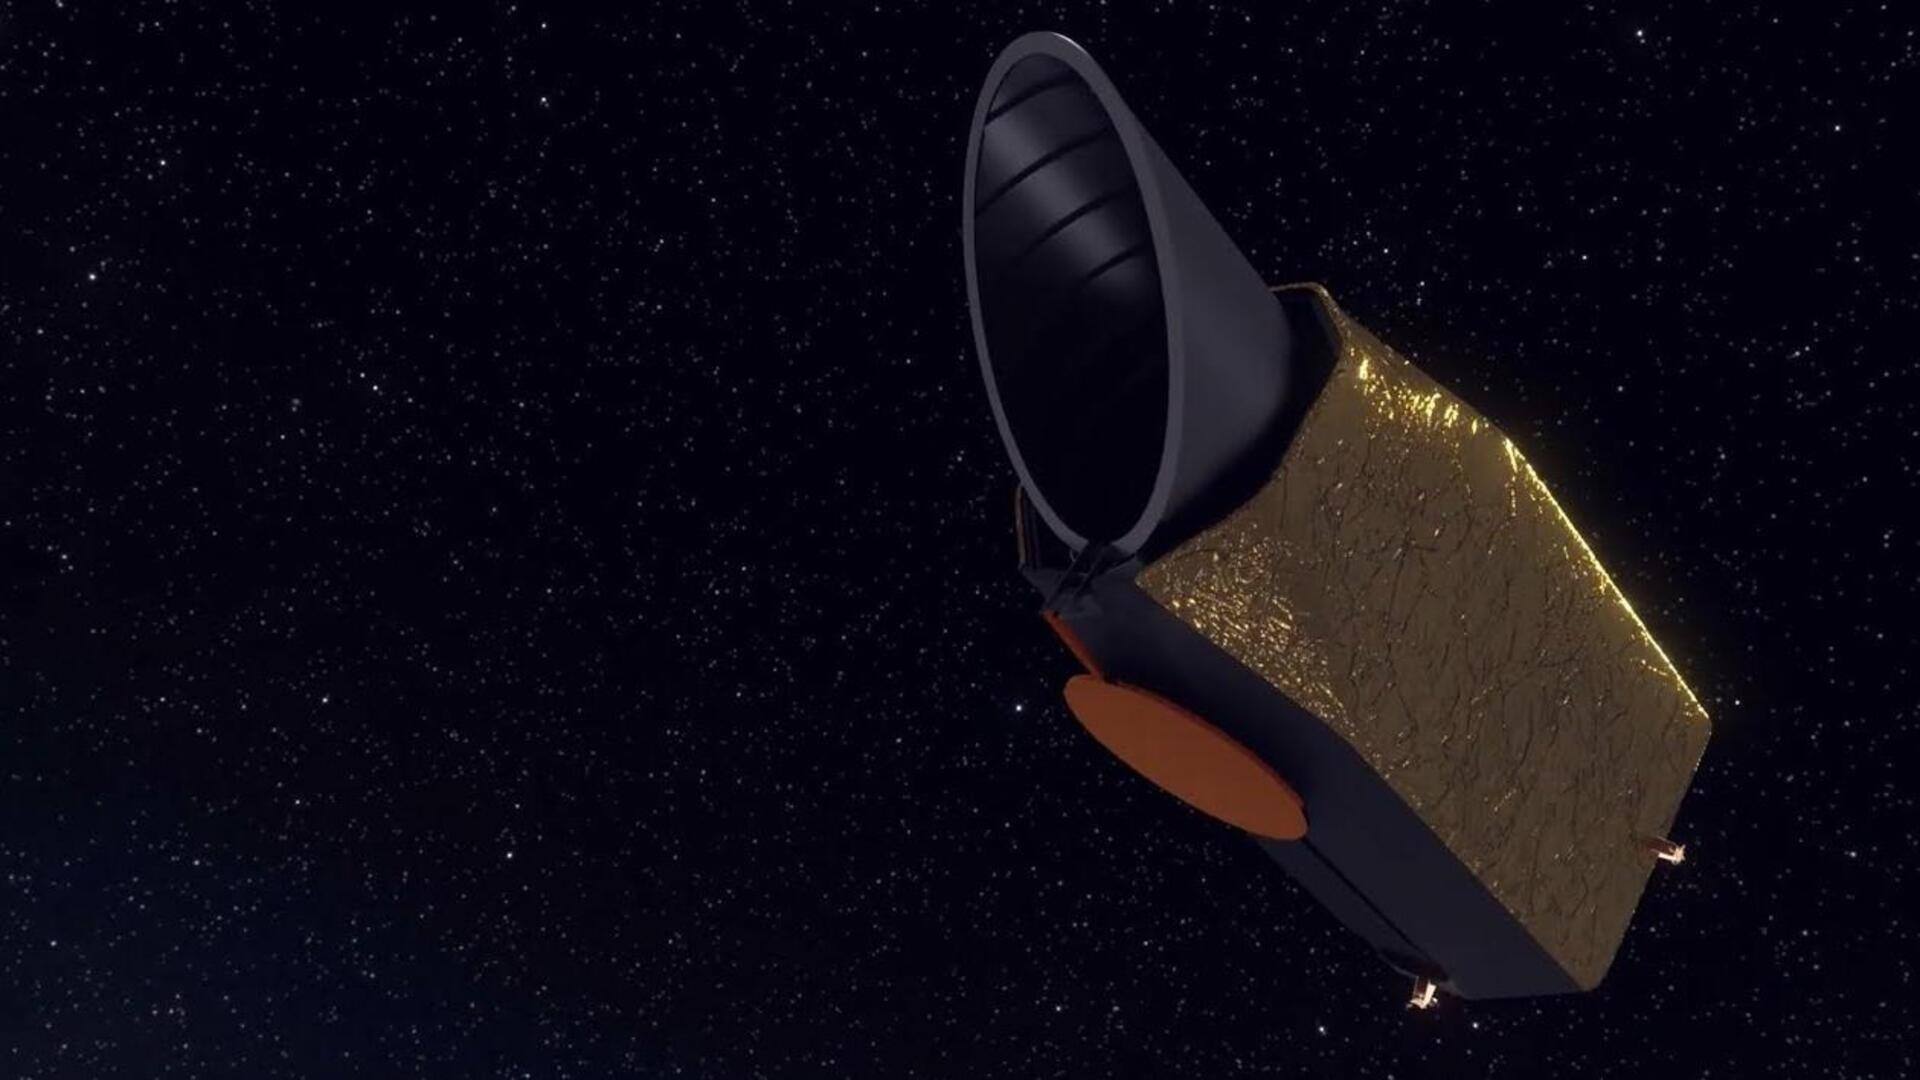 NASA's next flagship space telescope could be JWST's successor